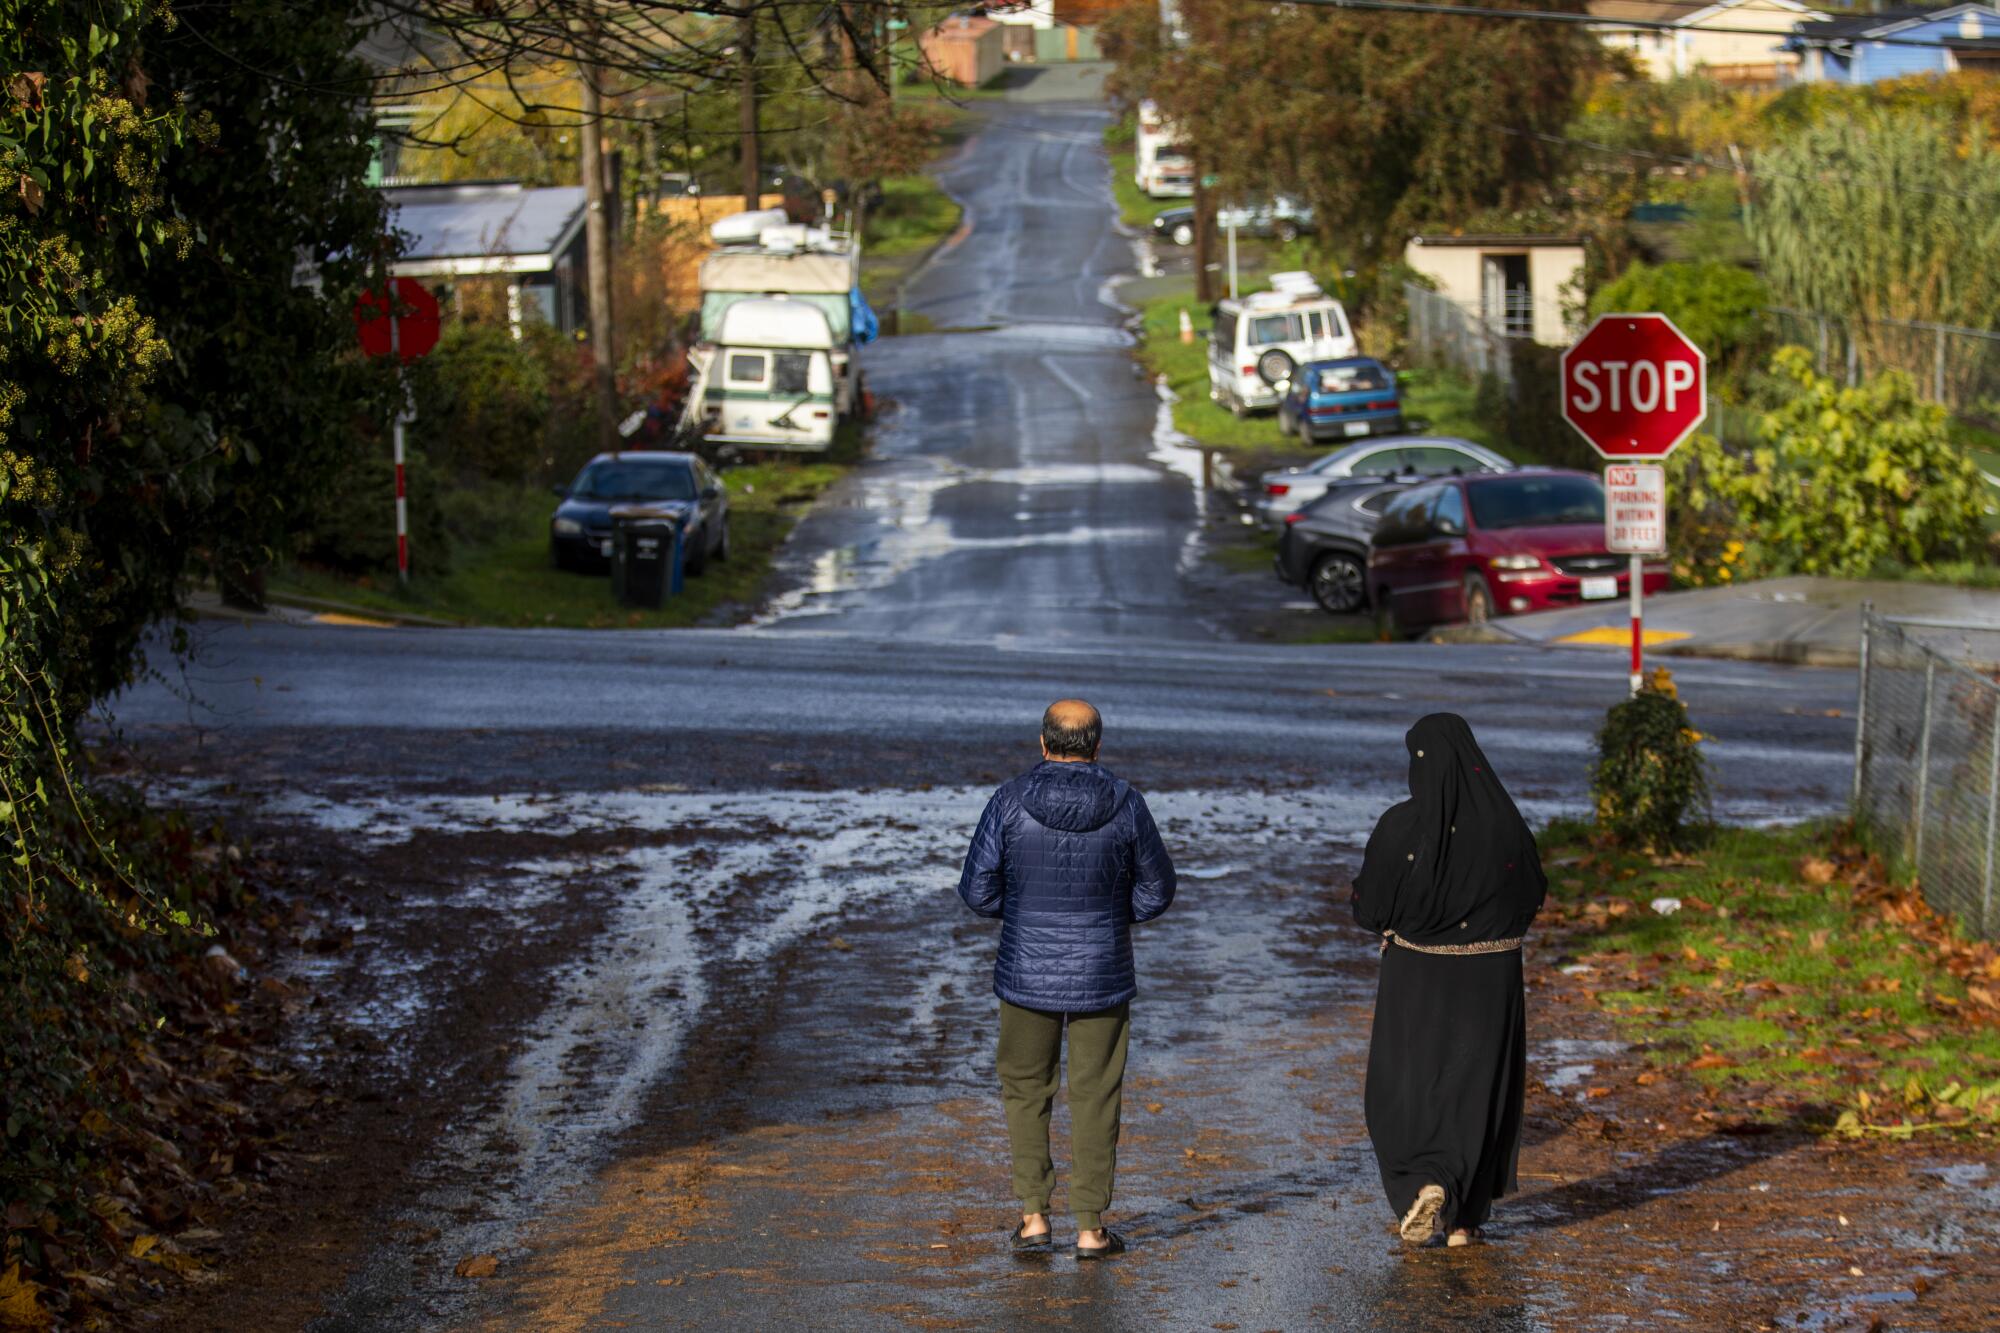 Two Afghan refugees walk down a street in Seattle.